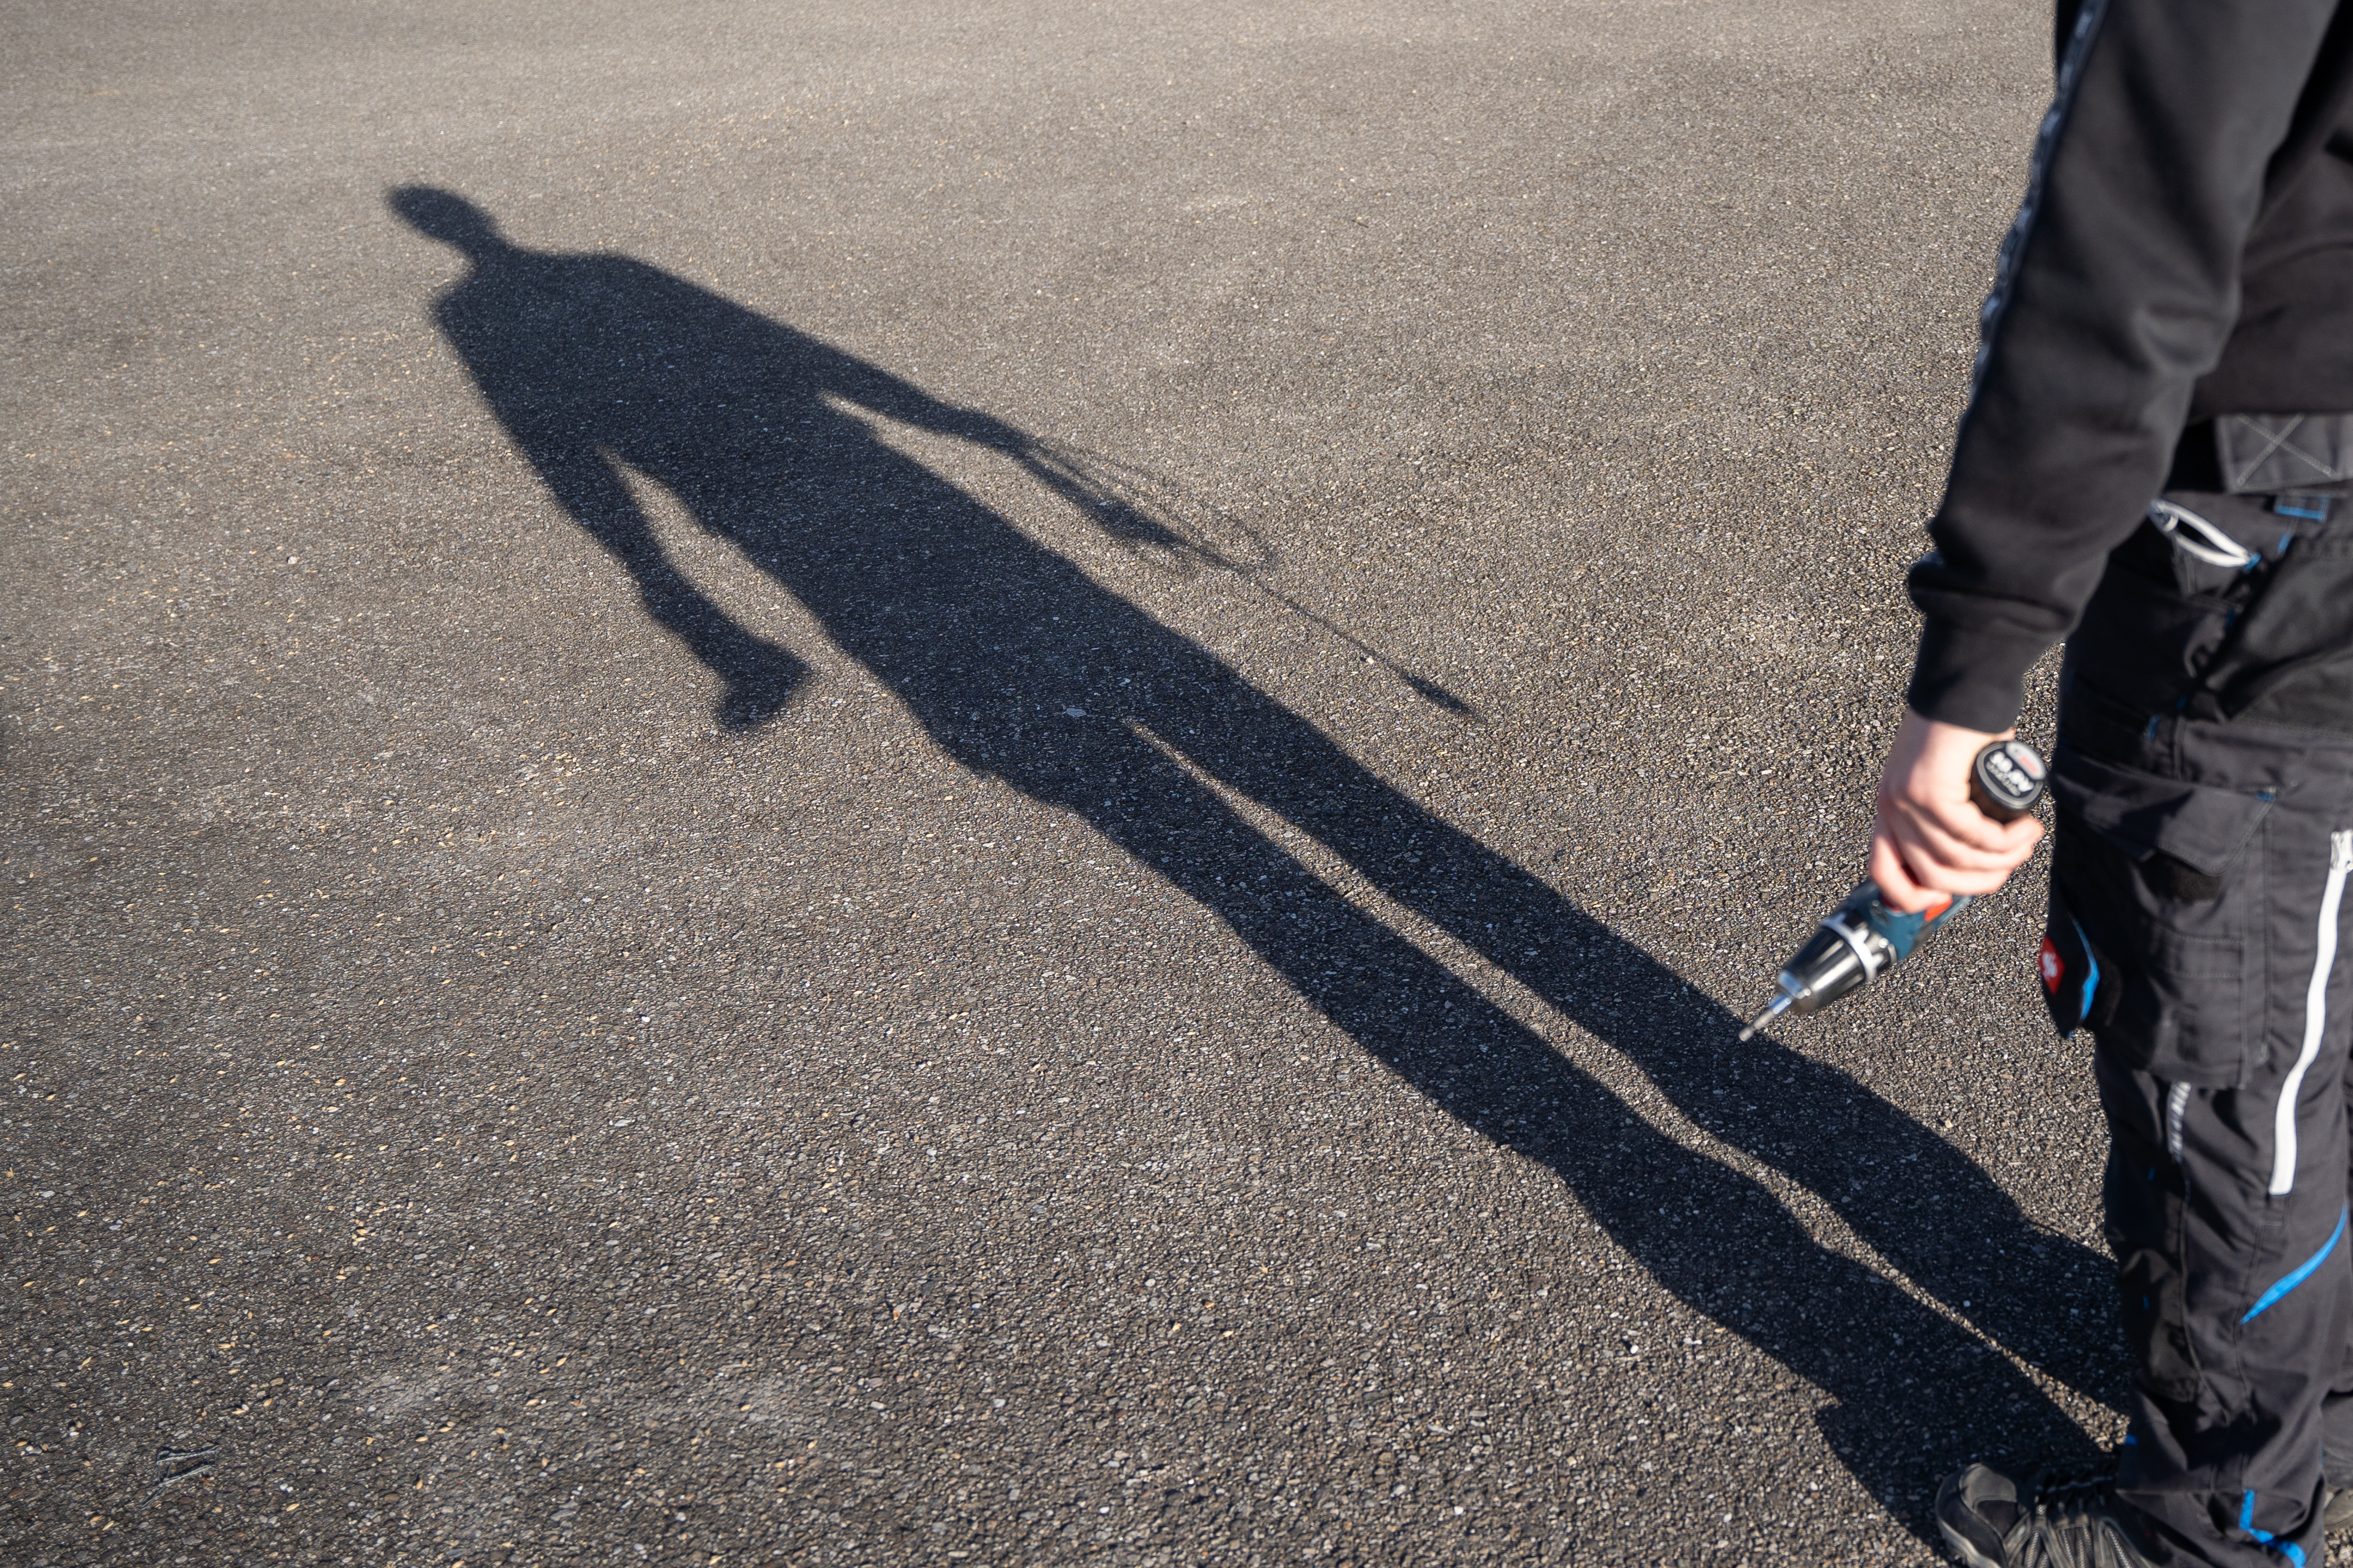 Shadow of person with drill in hand